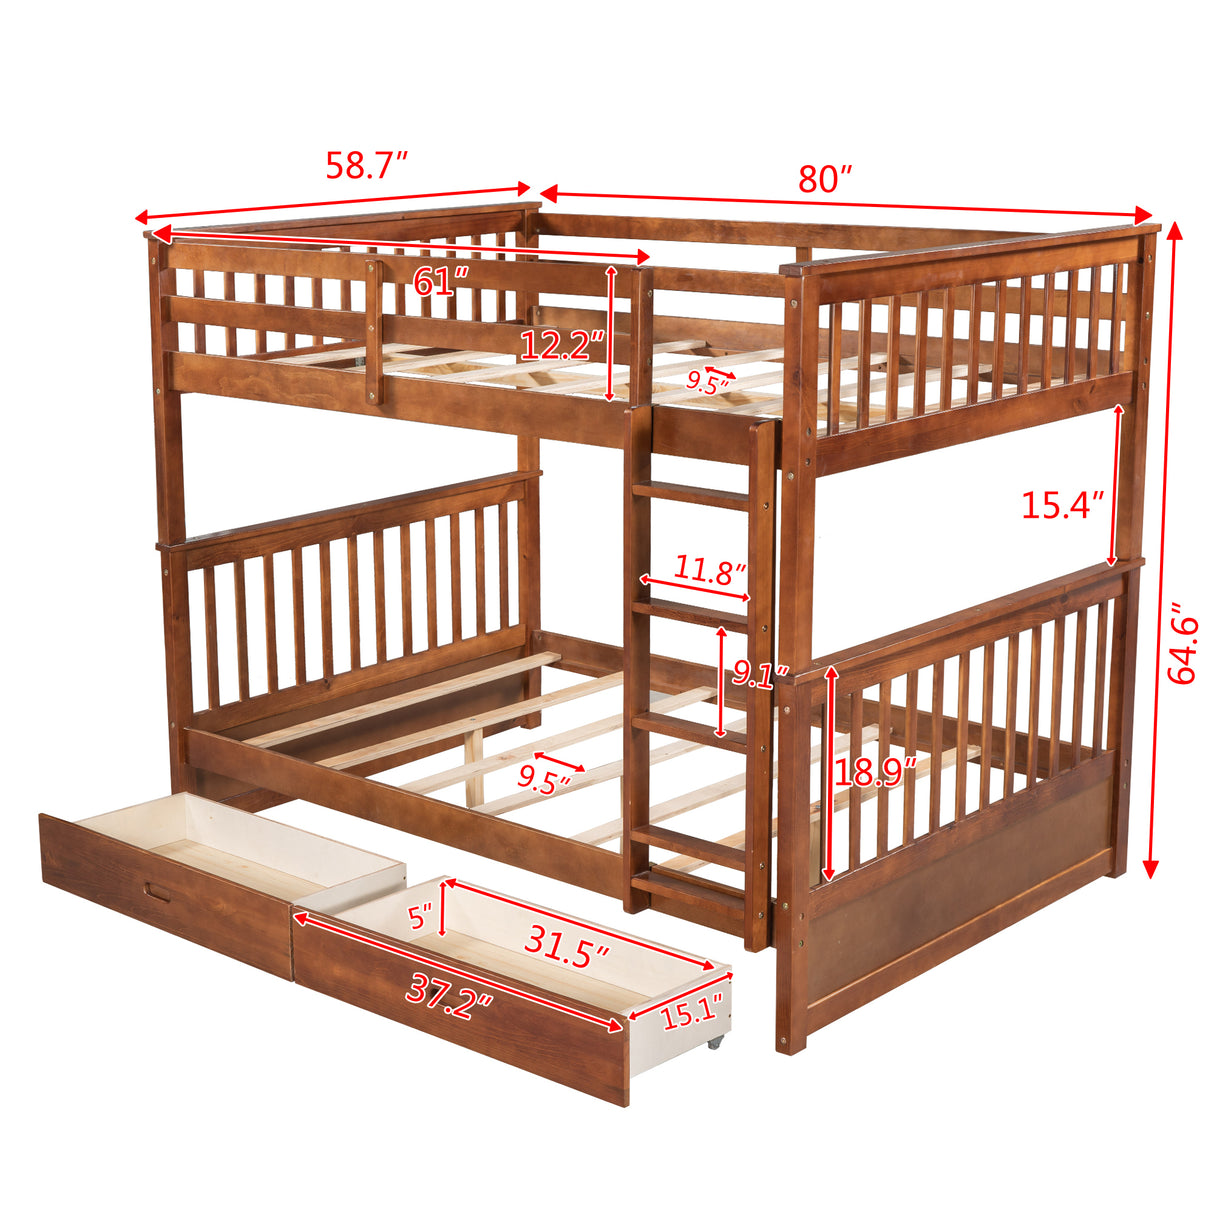 Full-Over-Full Bunk Bed with Ladders and Two Storage Drawers (Walnut) - Home Elegance USA